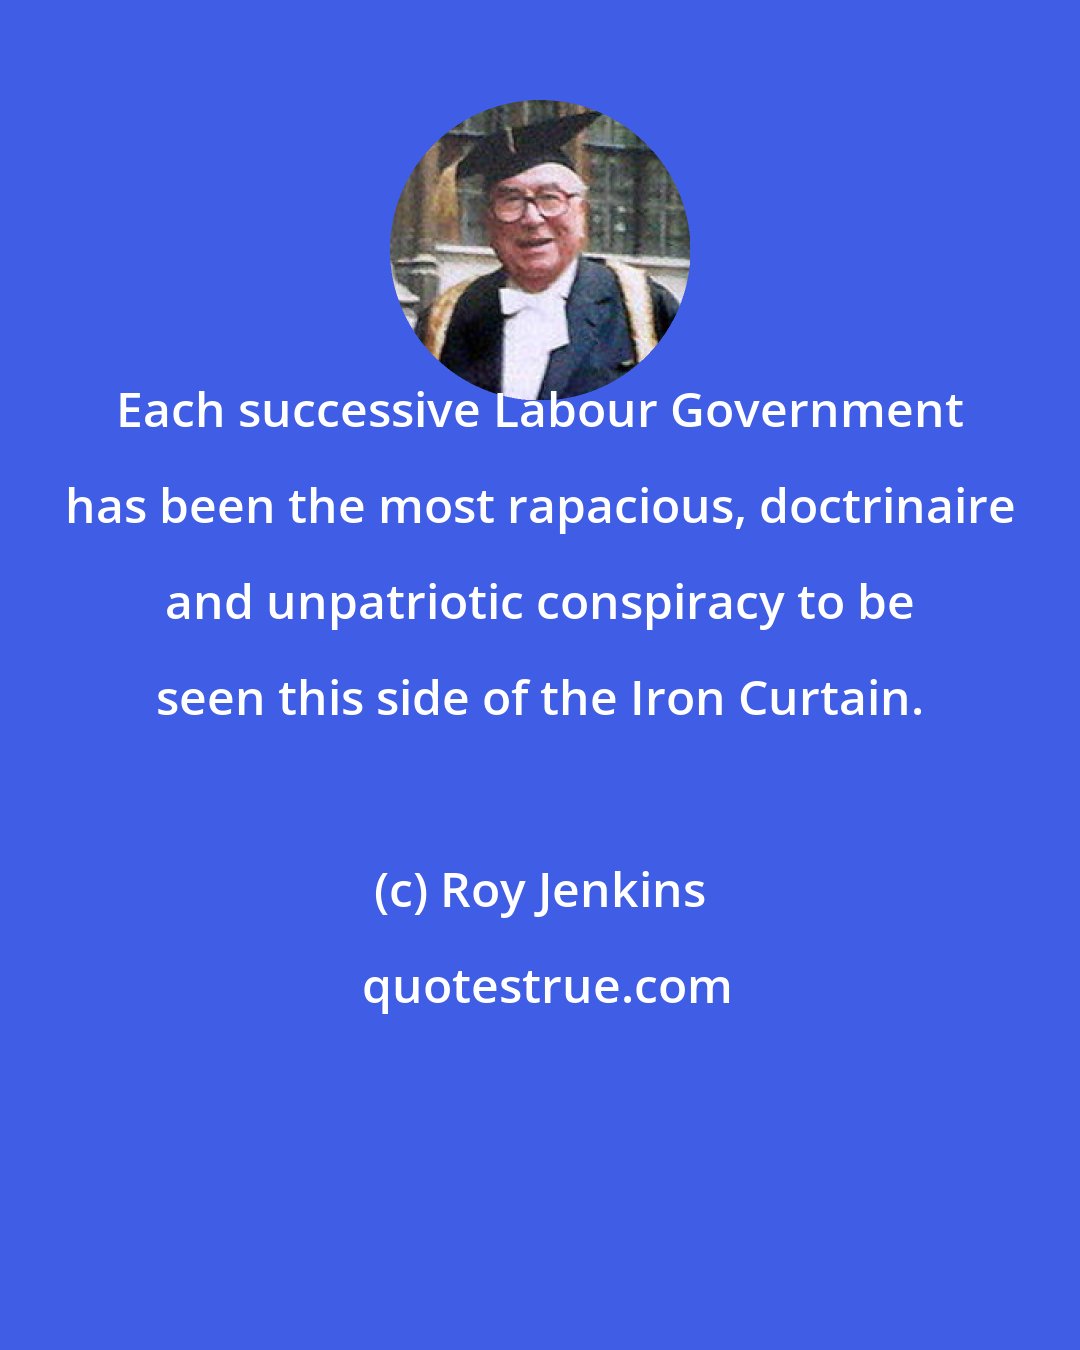 Roy Jenkins: Each successive Labour Government has been the most rapacious, doctrinaire and unpatriotic conspiracy to be seen this side of the Iron Curtain.